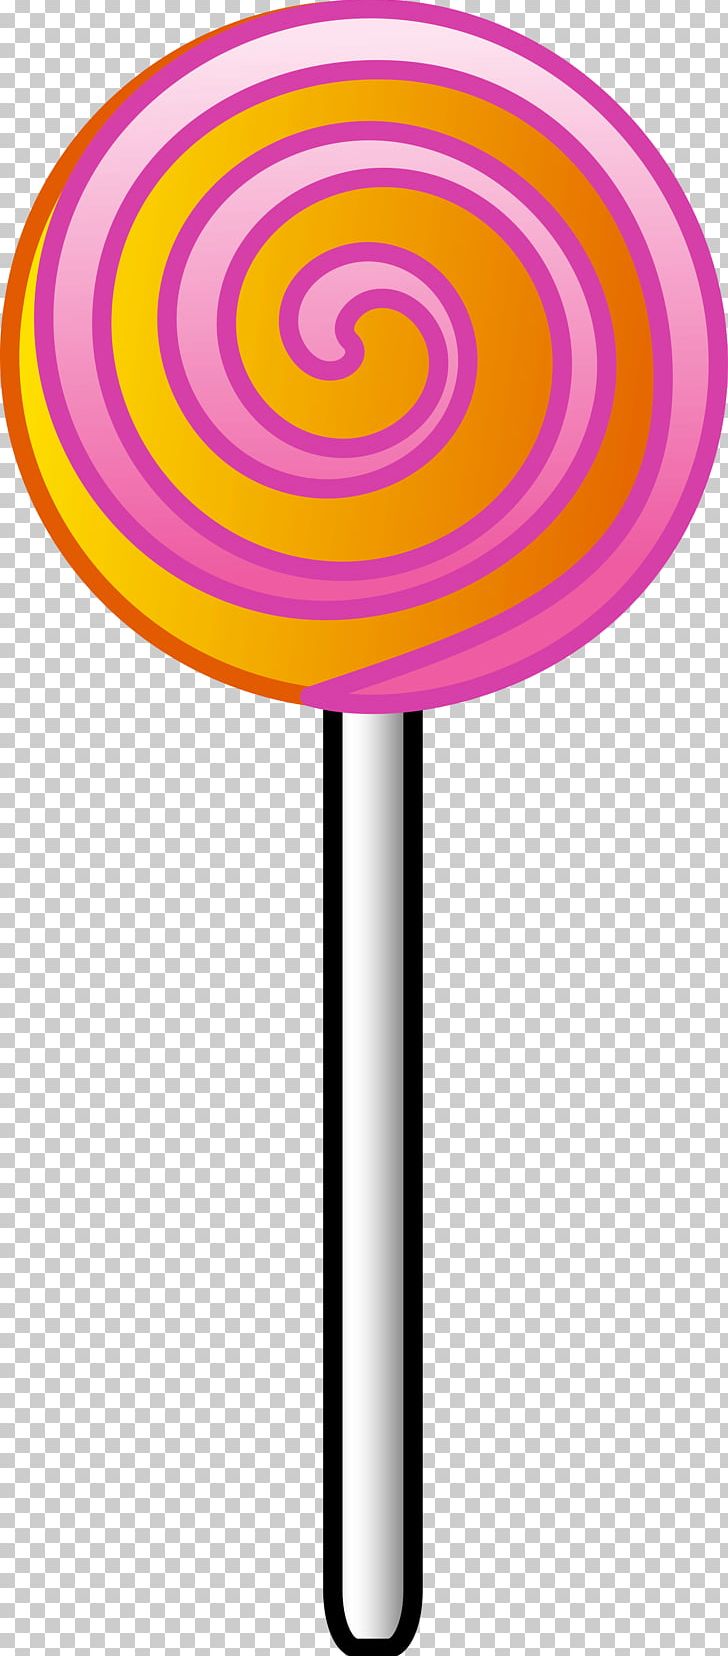 Lollipop Candy Cane PNG, Clipart, Avatar, Candy, Candy Cane, Circle, Download Free PNG Download